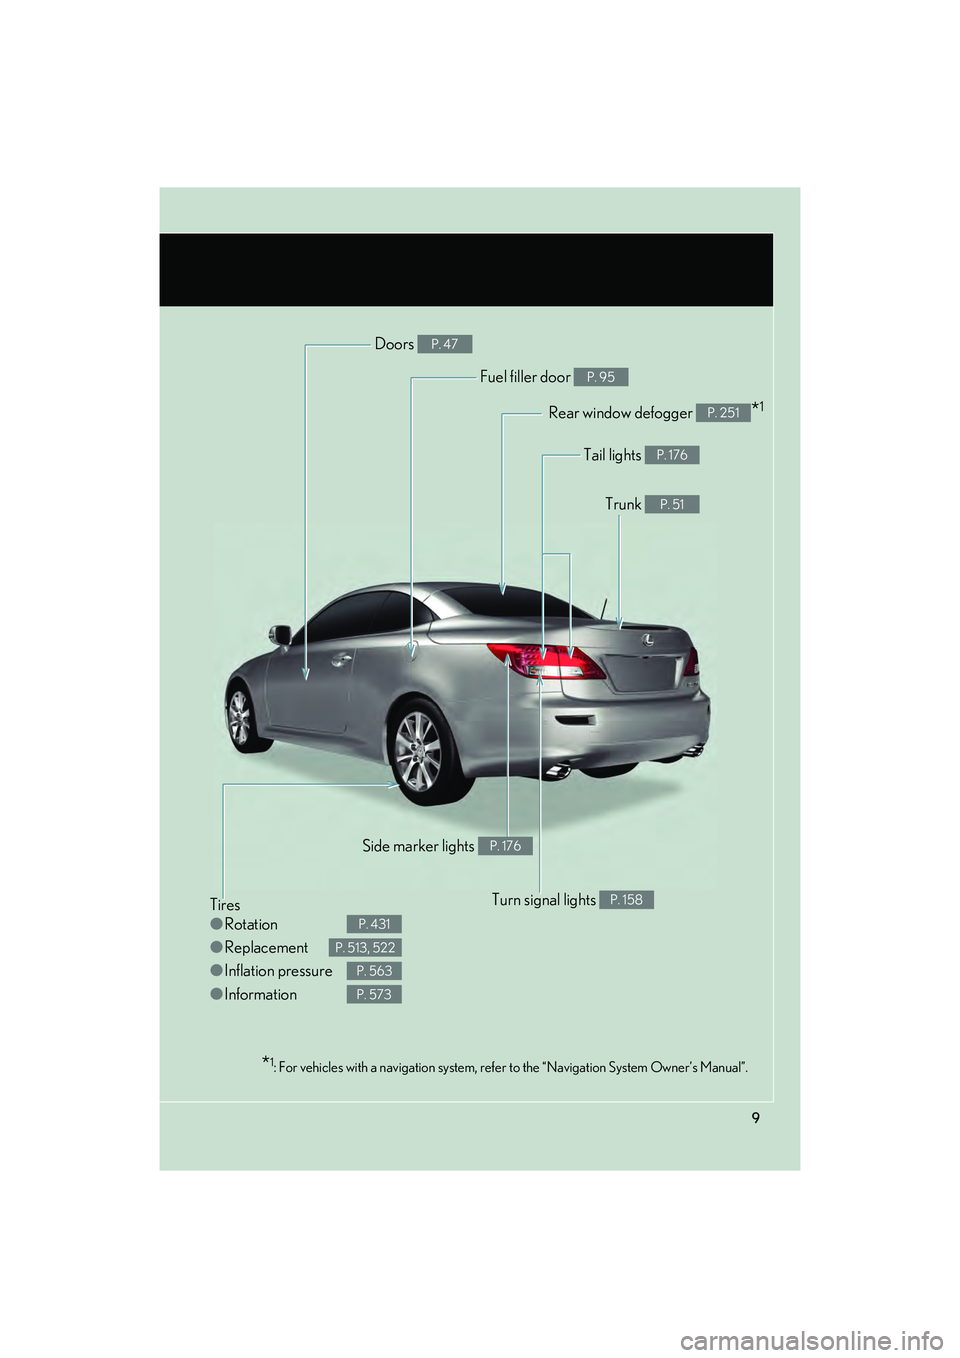 Lexus IS250C 2014  Owners Manual IS250C/350C_U
9
Tires
●Rotation
● Replacement
● Inflation pressure
● Information
P. 431
P. 513, 522
P. 563
P. 573
Tail lights P. 176
Trunk P. 51
Rear window defogger *1P. 251
Doors P. 47
Fuel 